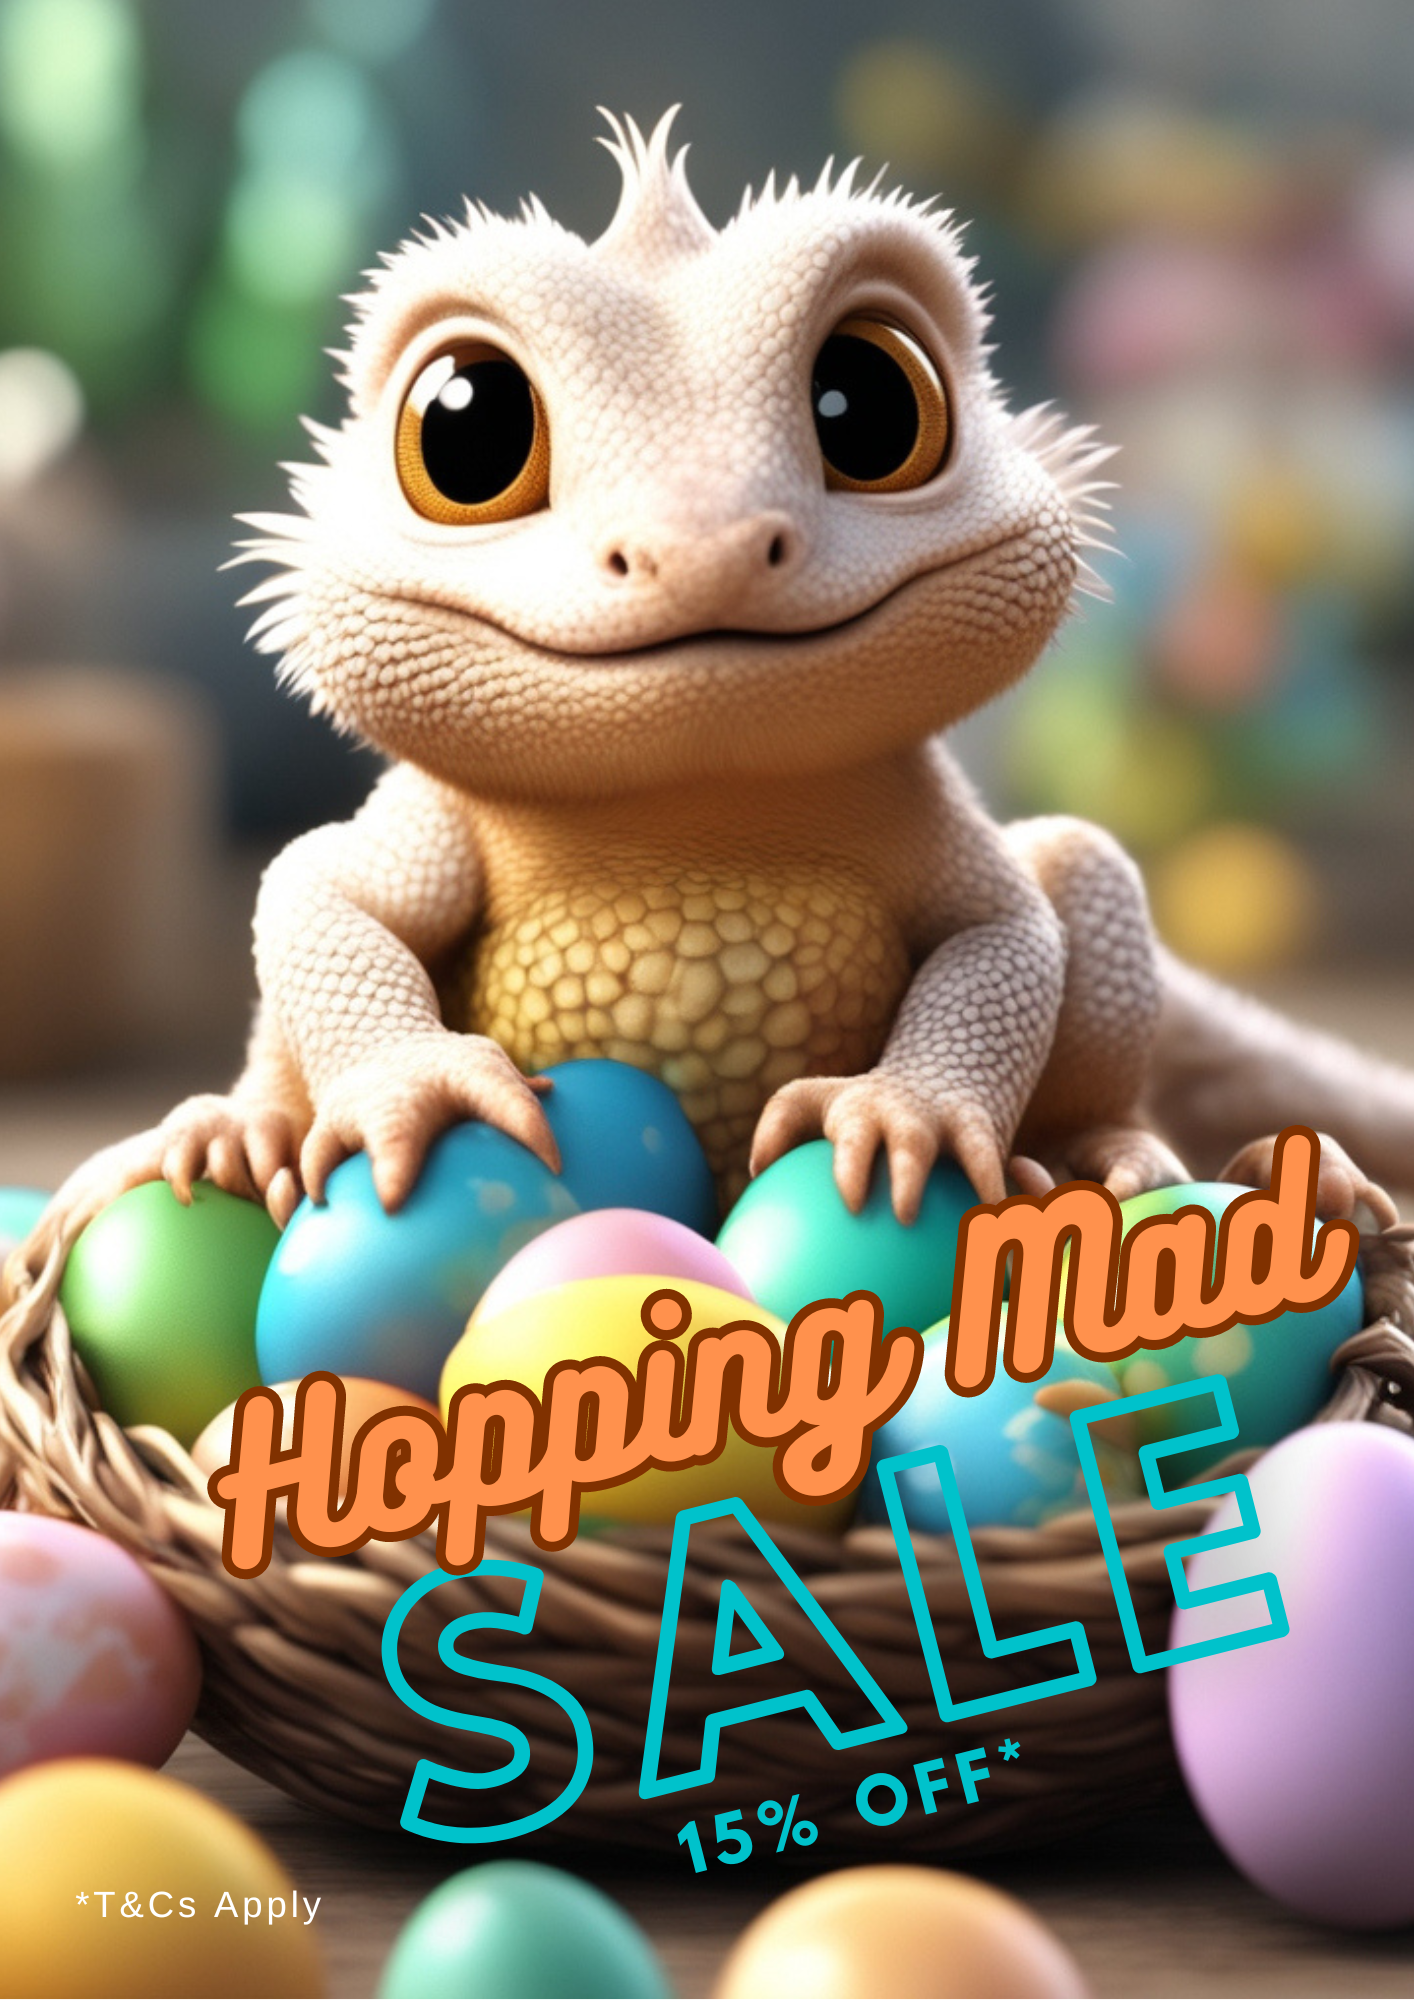 Sydney Reptiles 15% Off Easter sale. Bearded Dragon sitting in a basket of Easter eggs. Australian Reptiles and lizards.